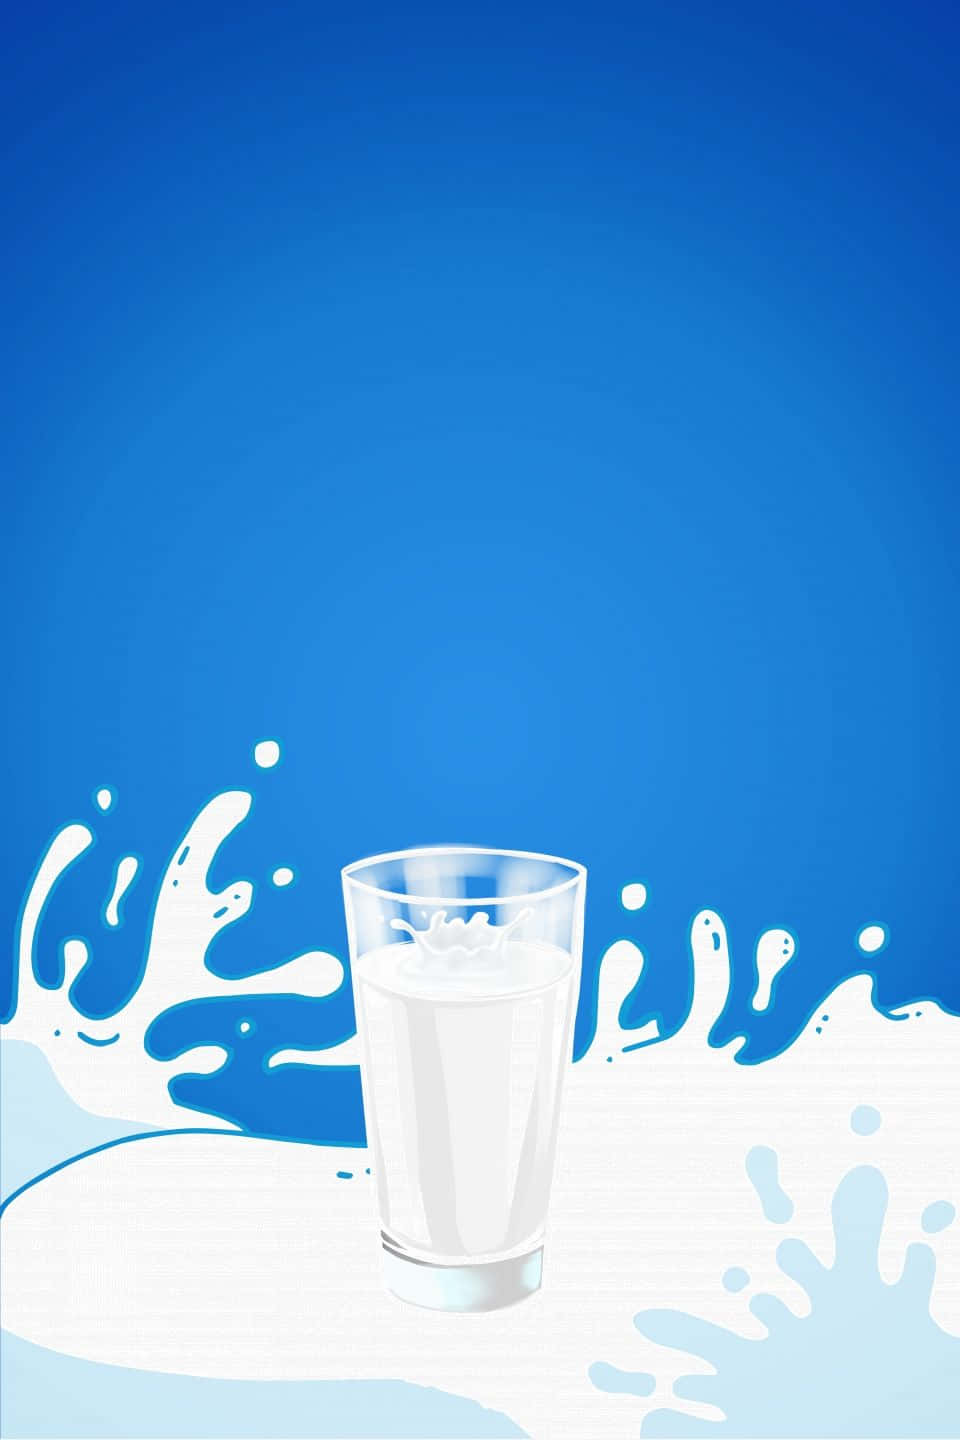 A Glass Of Milk On A Blue Background